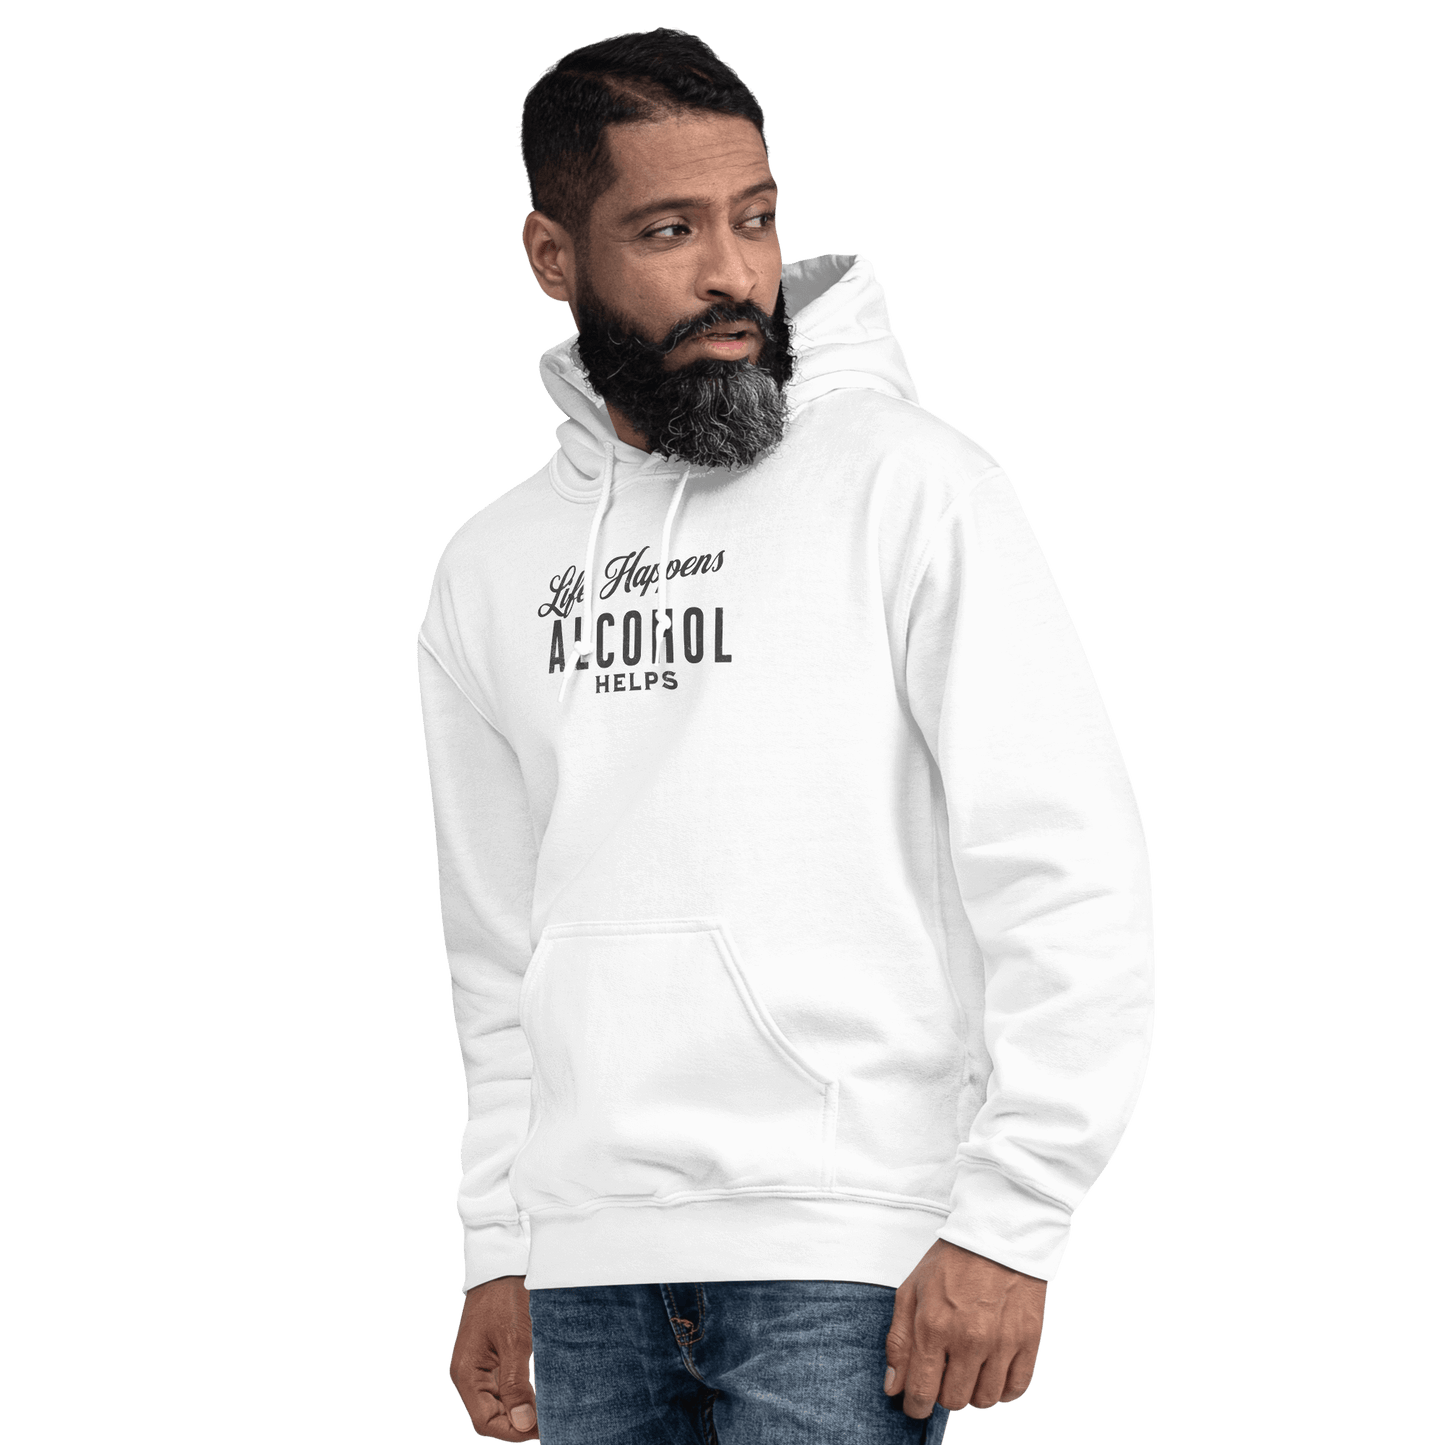 Life Happens Alcohol Helps Hoodie - Stay Cozy & Stylish Discover your new favorite hoodie - perfect for those cool evenings with a touch of humor. Soft, stylish, and humorously relatable.